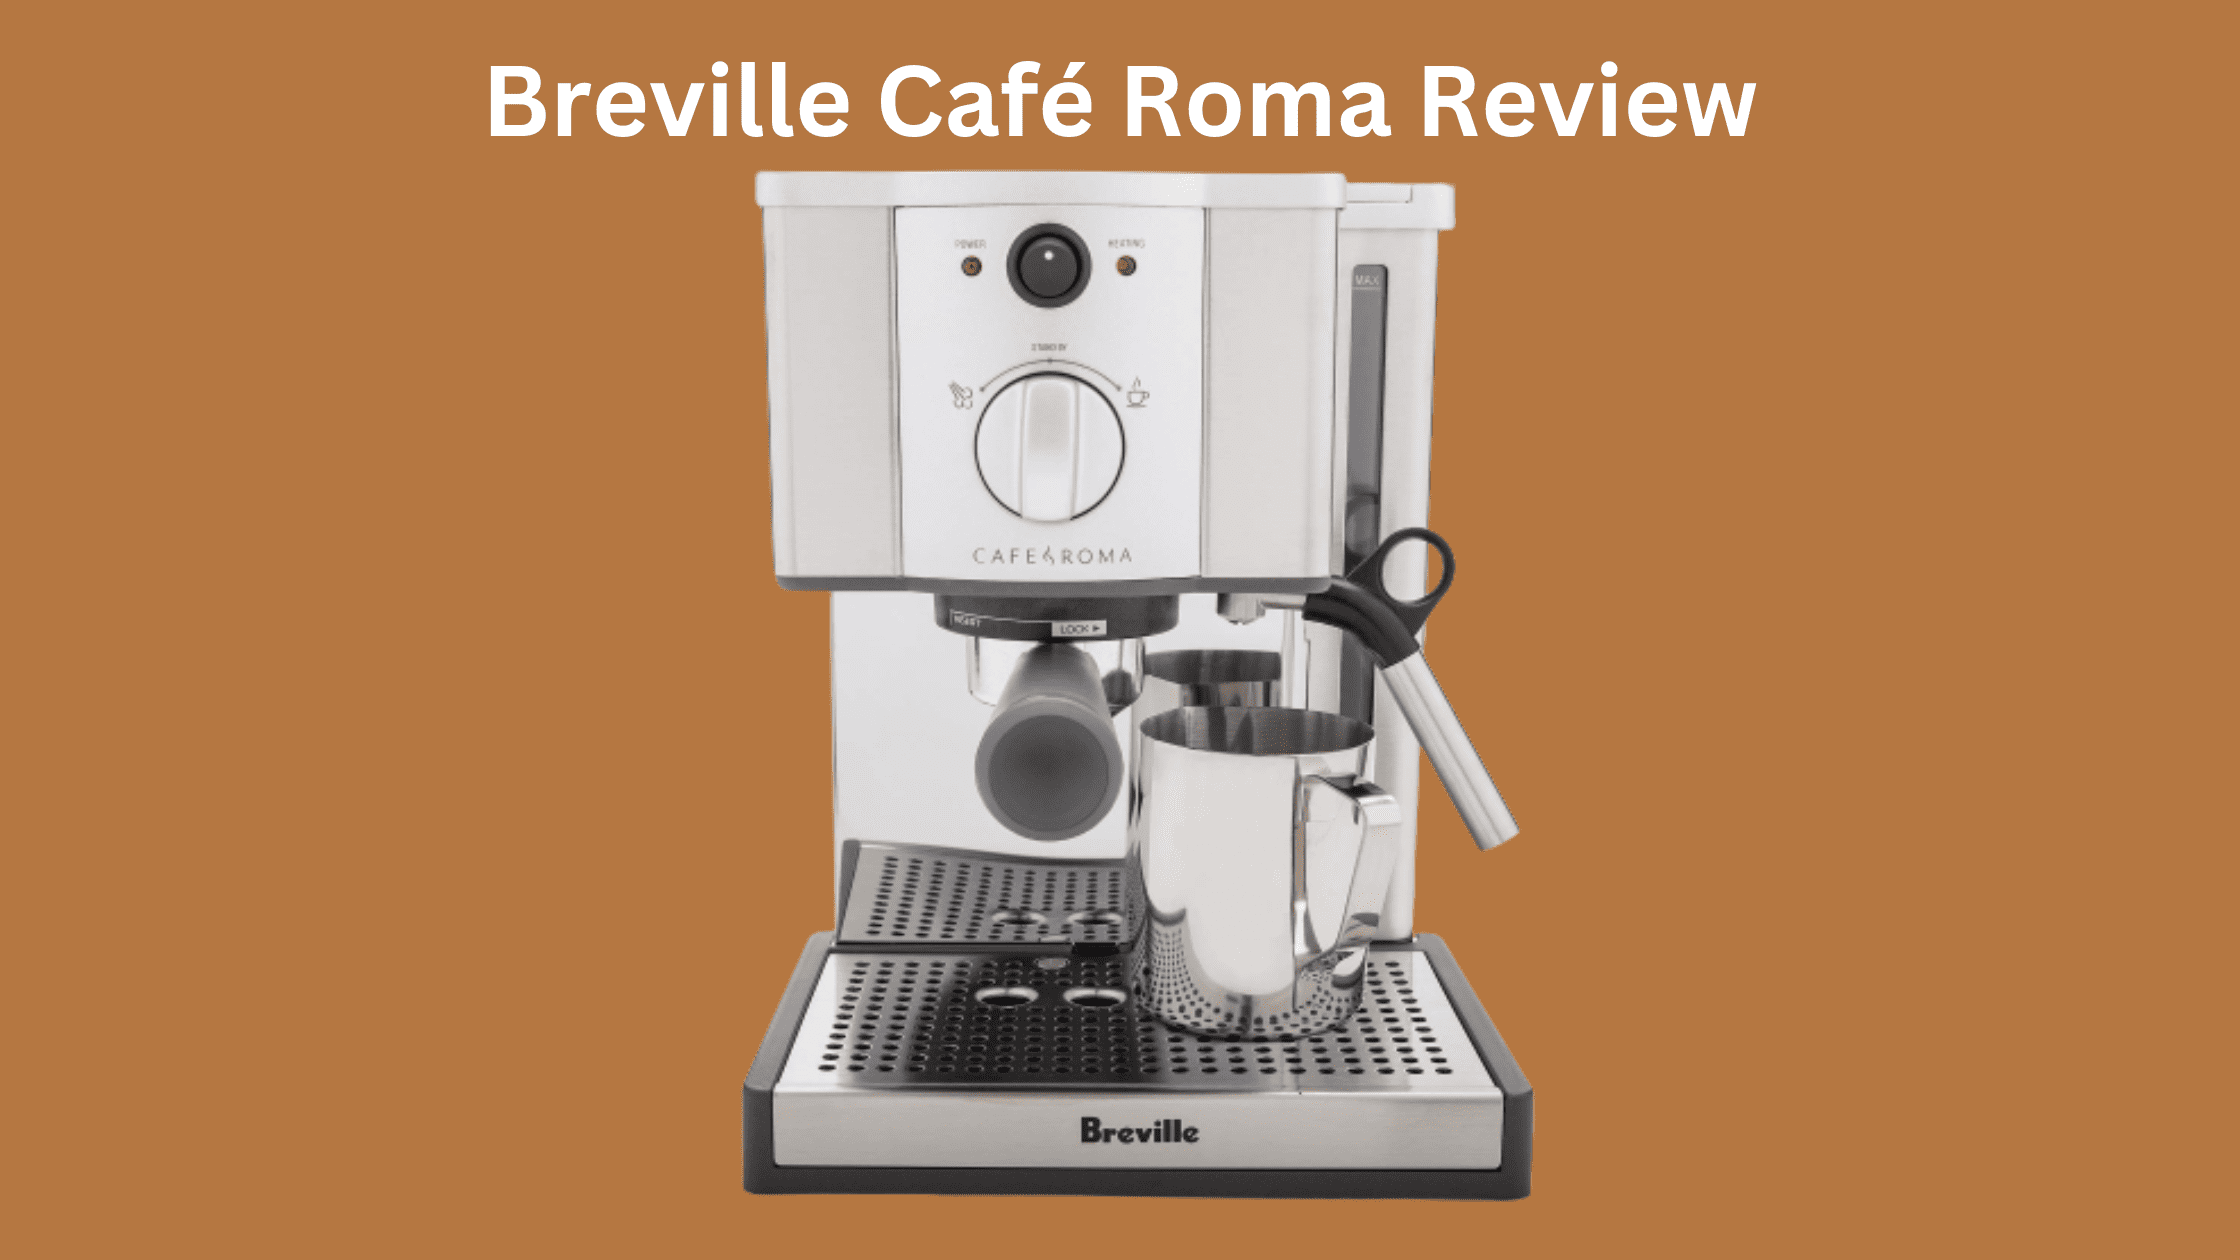 Breville Café Roma Review: How Good Is This Espresso Maker?